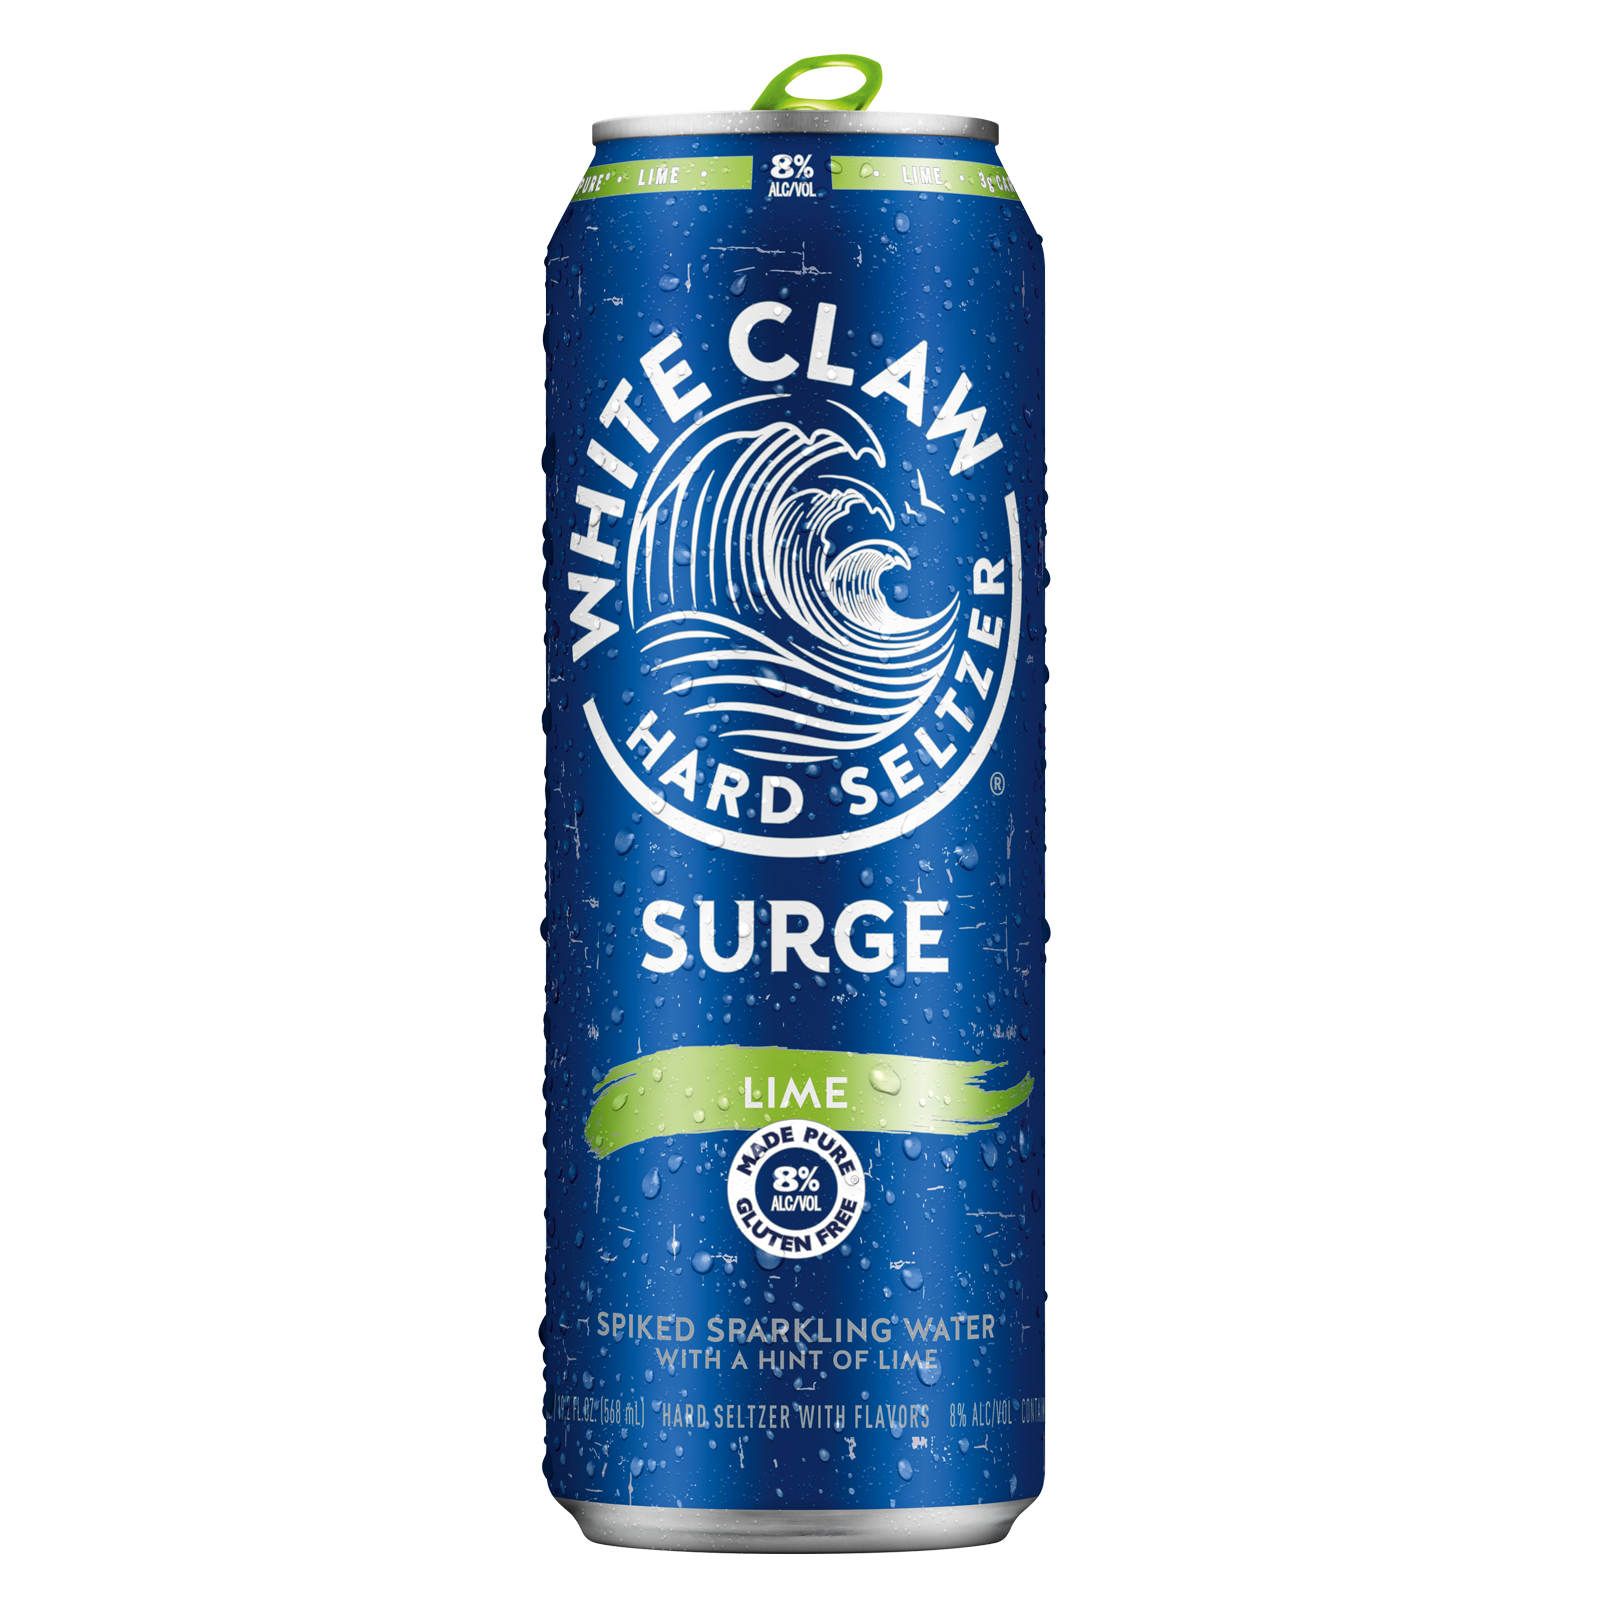 White Claw Hard Seltzer Surge Lime Single 19.2oz Can 8% ABV